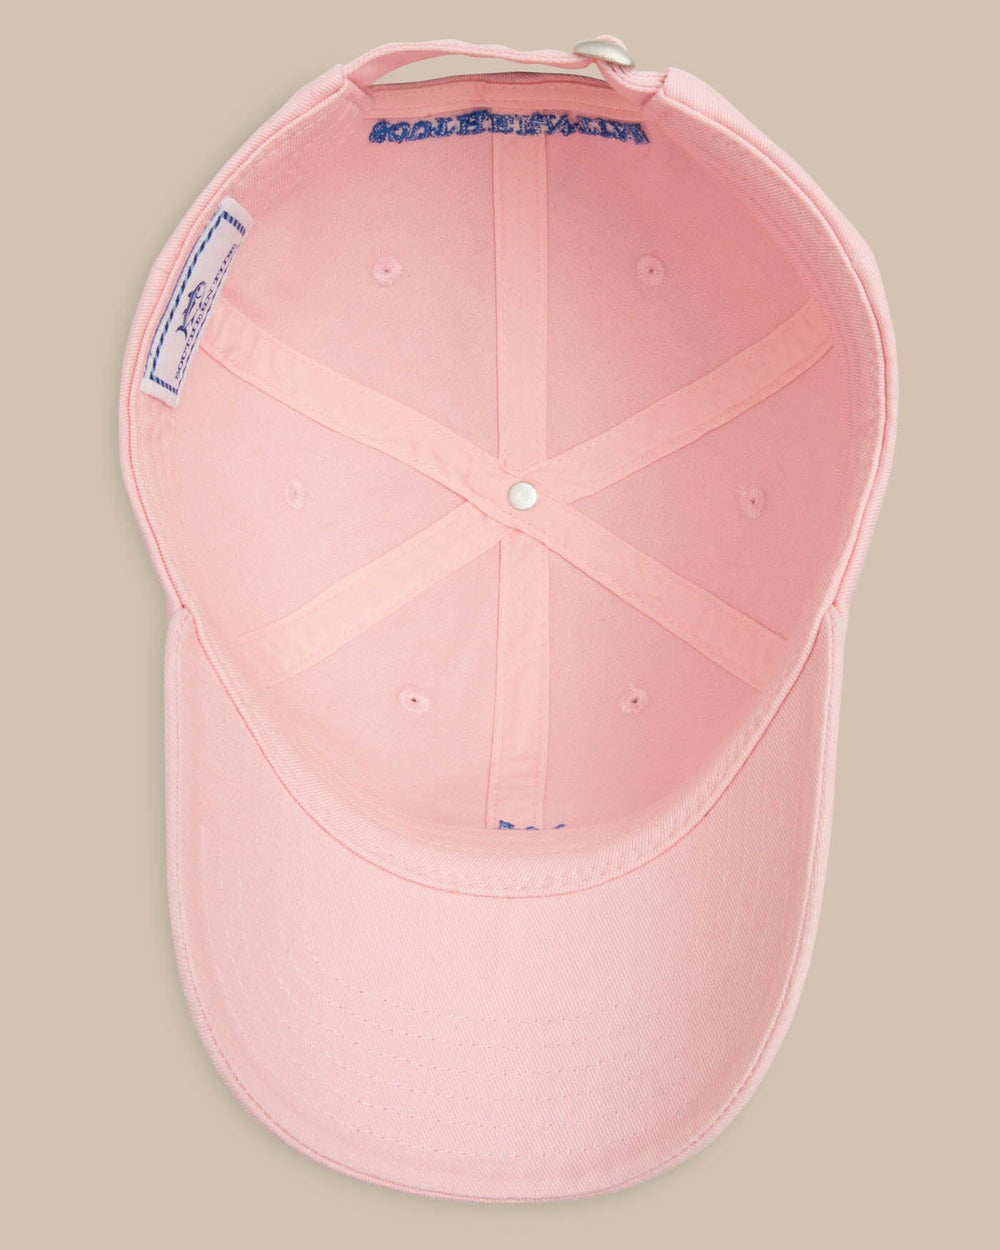 The inside of the Skipjack Hat by Southern Tide - Pink